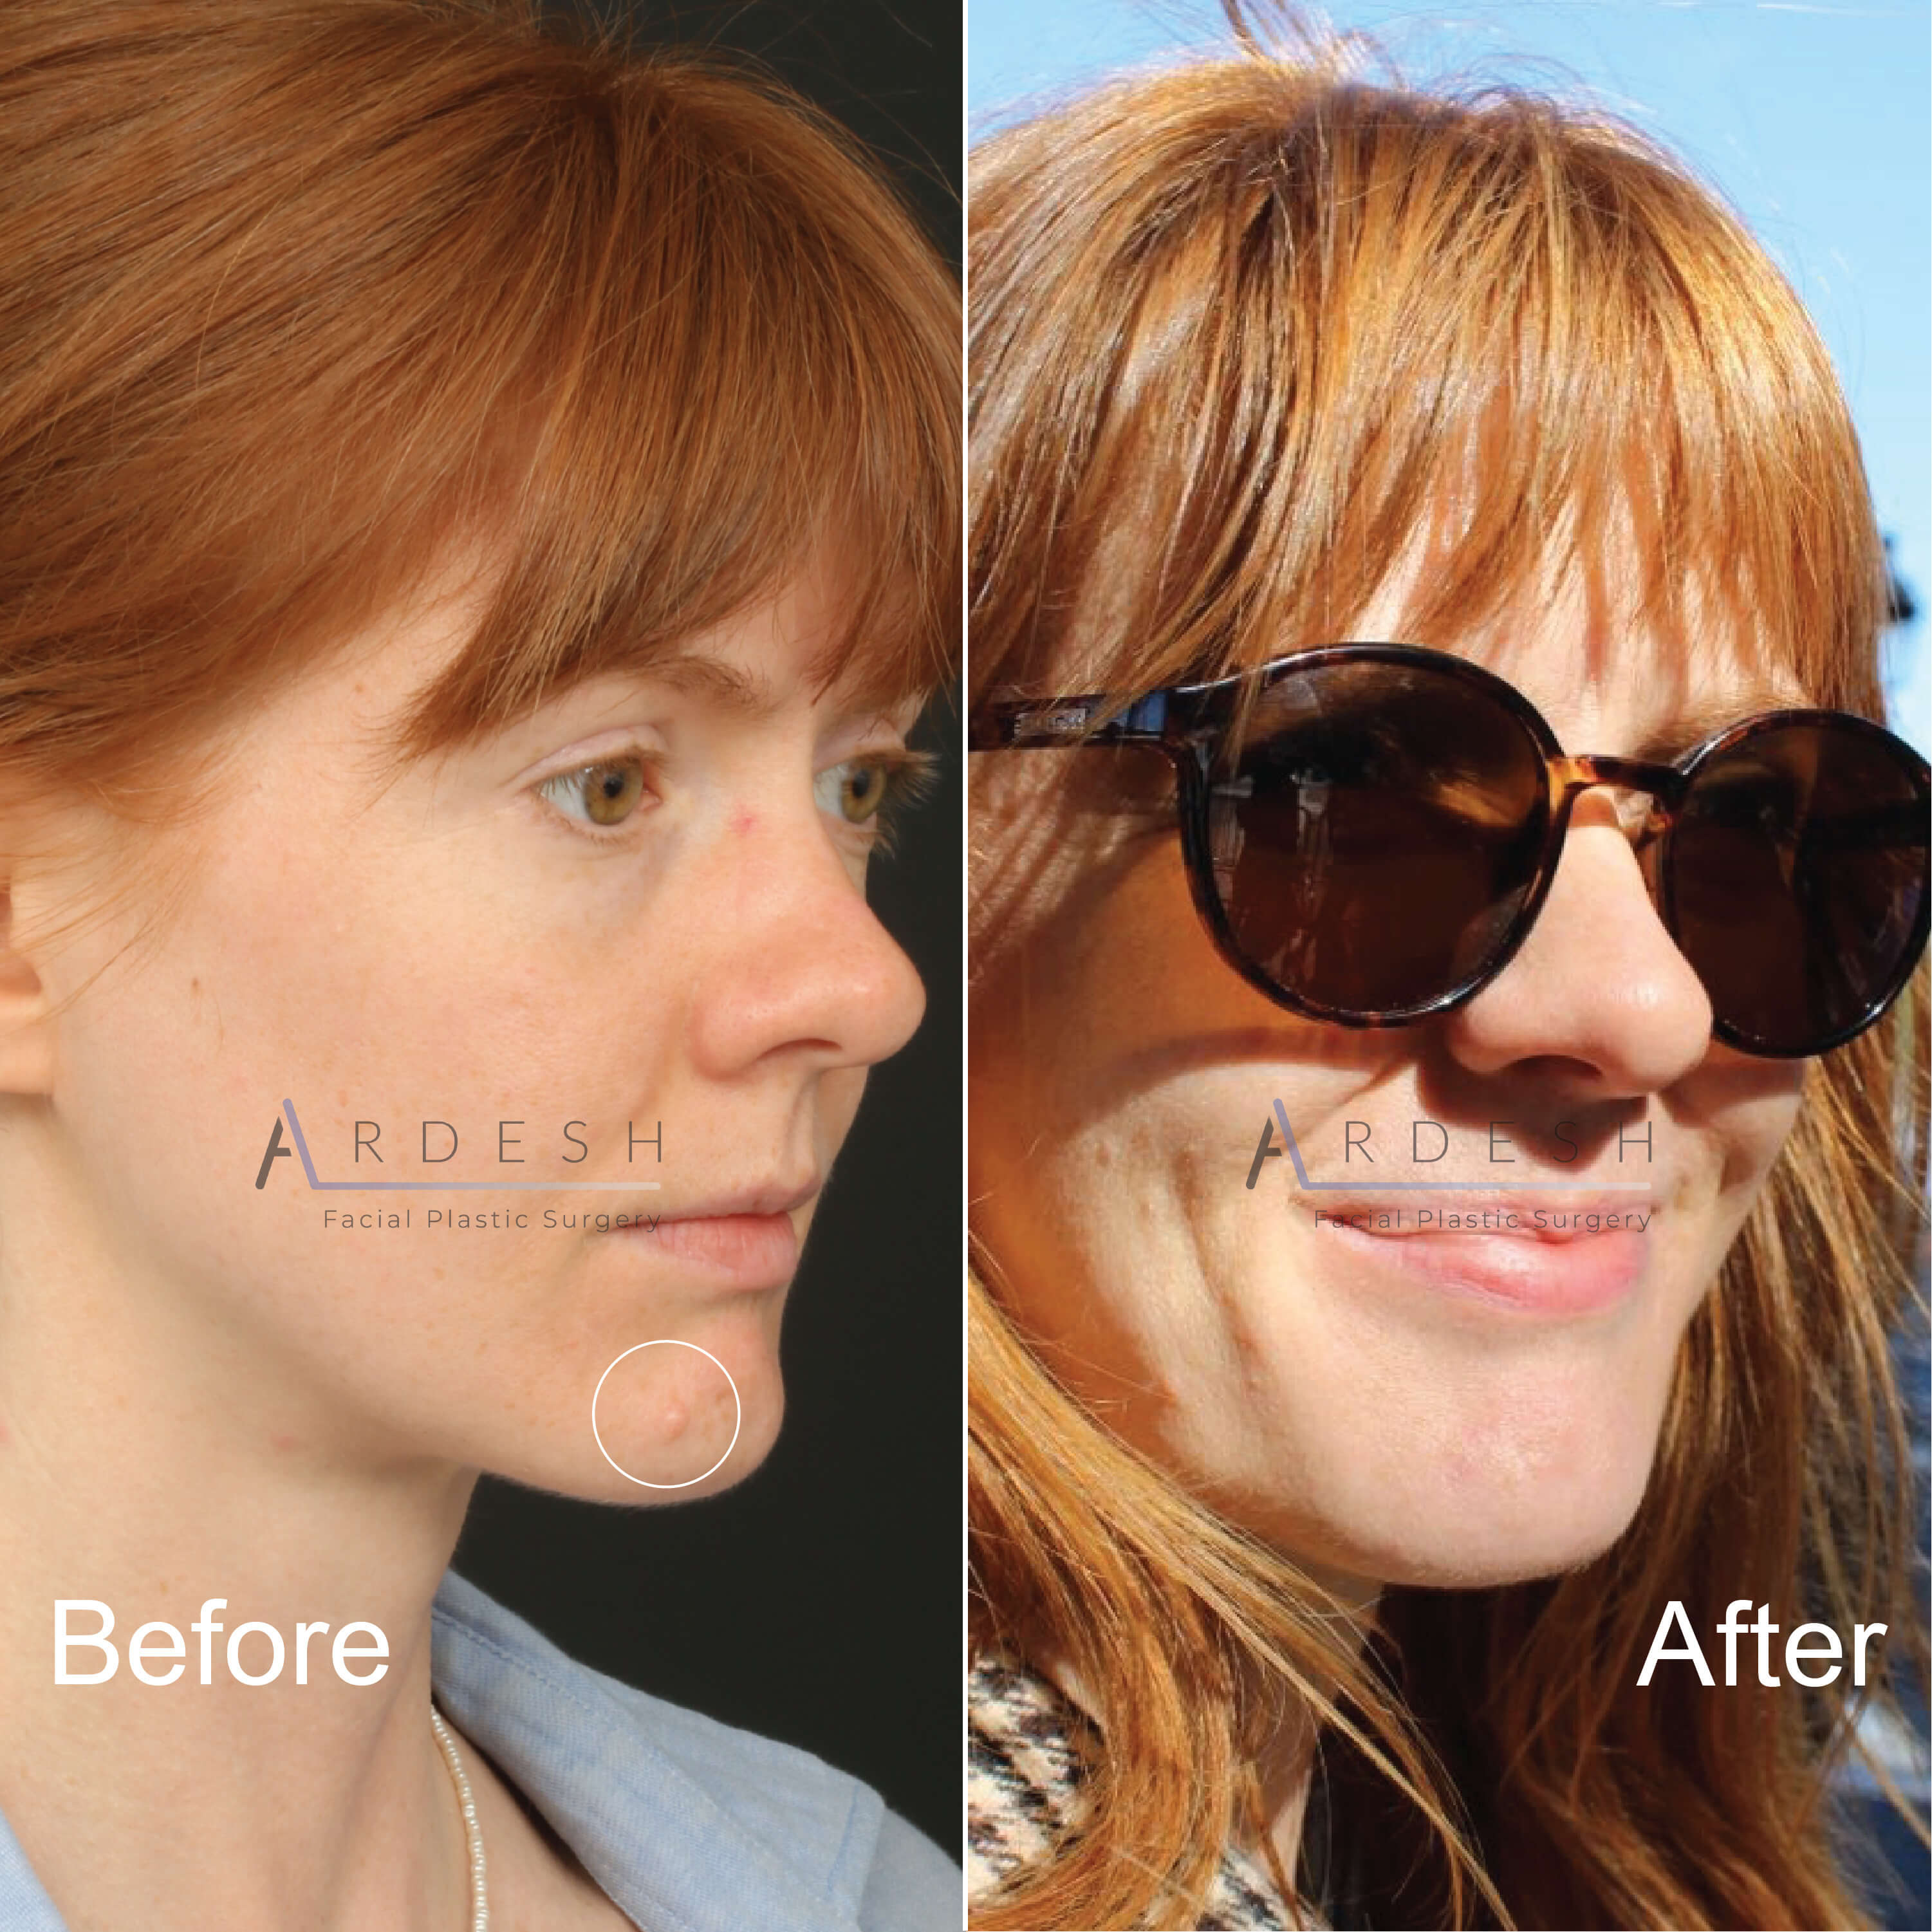 Mole Removal Before and After | Ardesh Facial Plastic Surgery